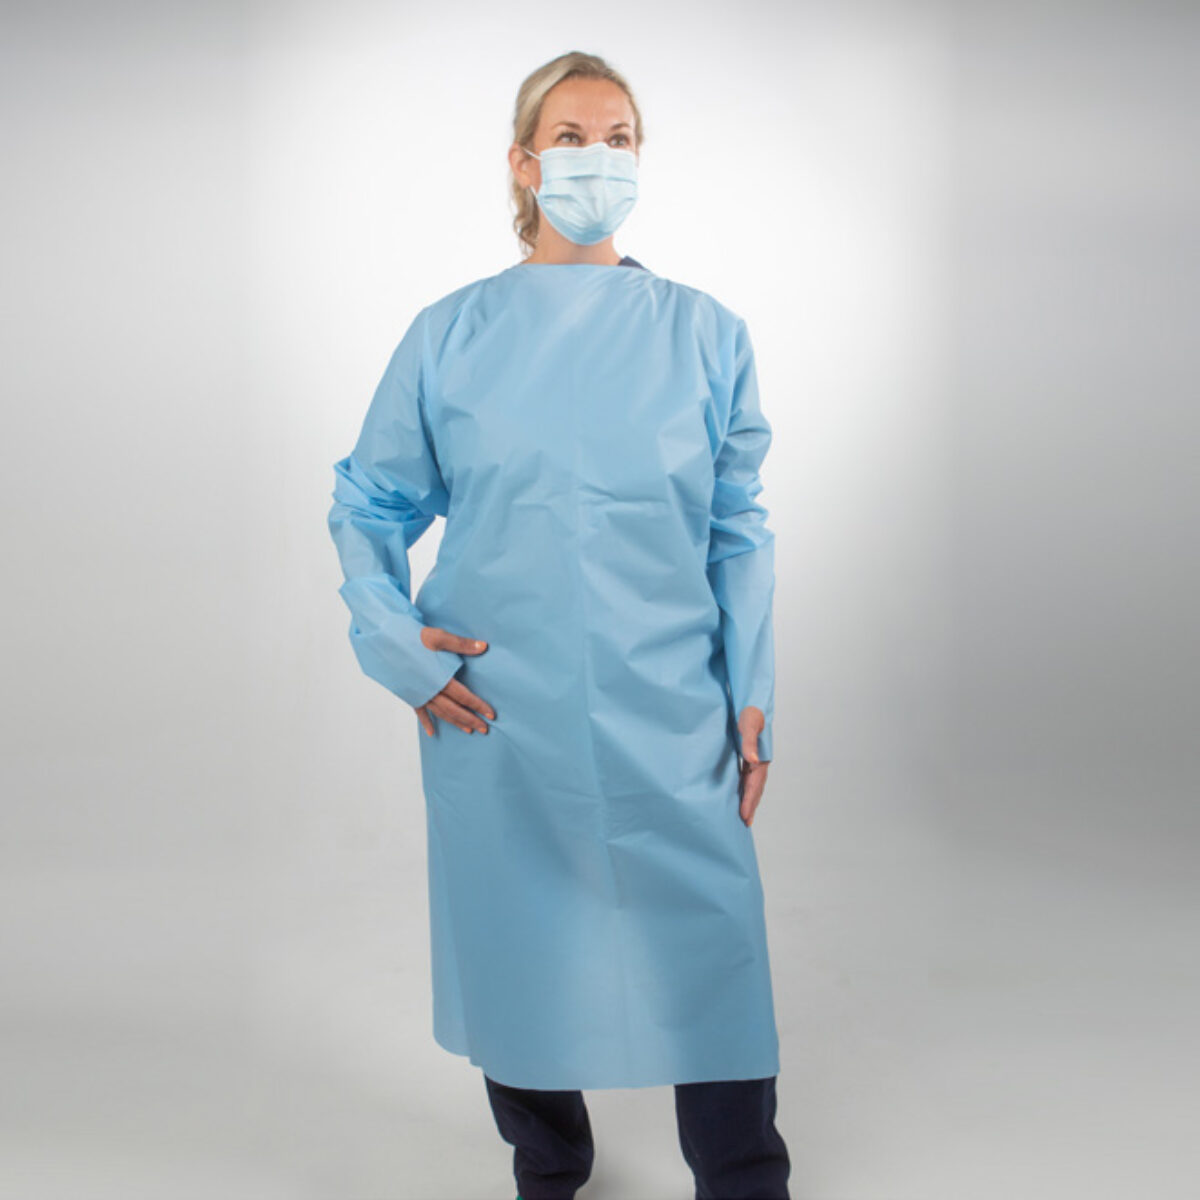 Medical Gowns - Protection Wear - Products